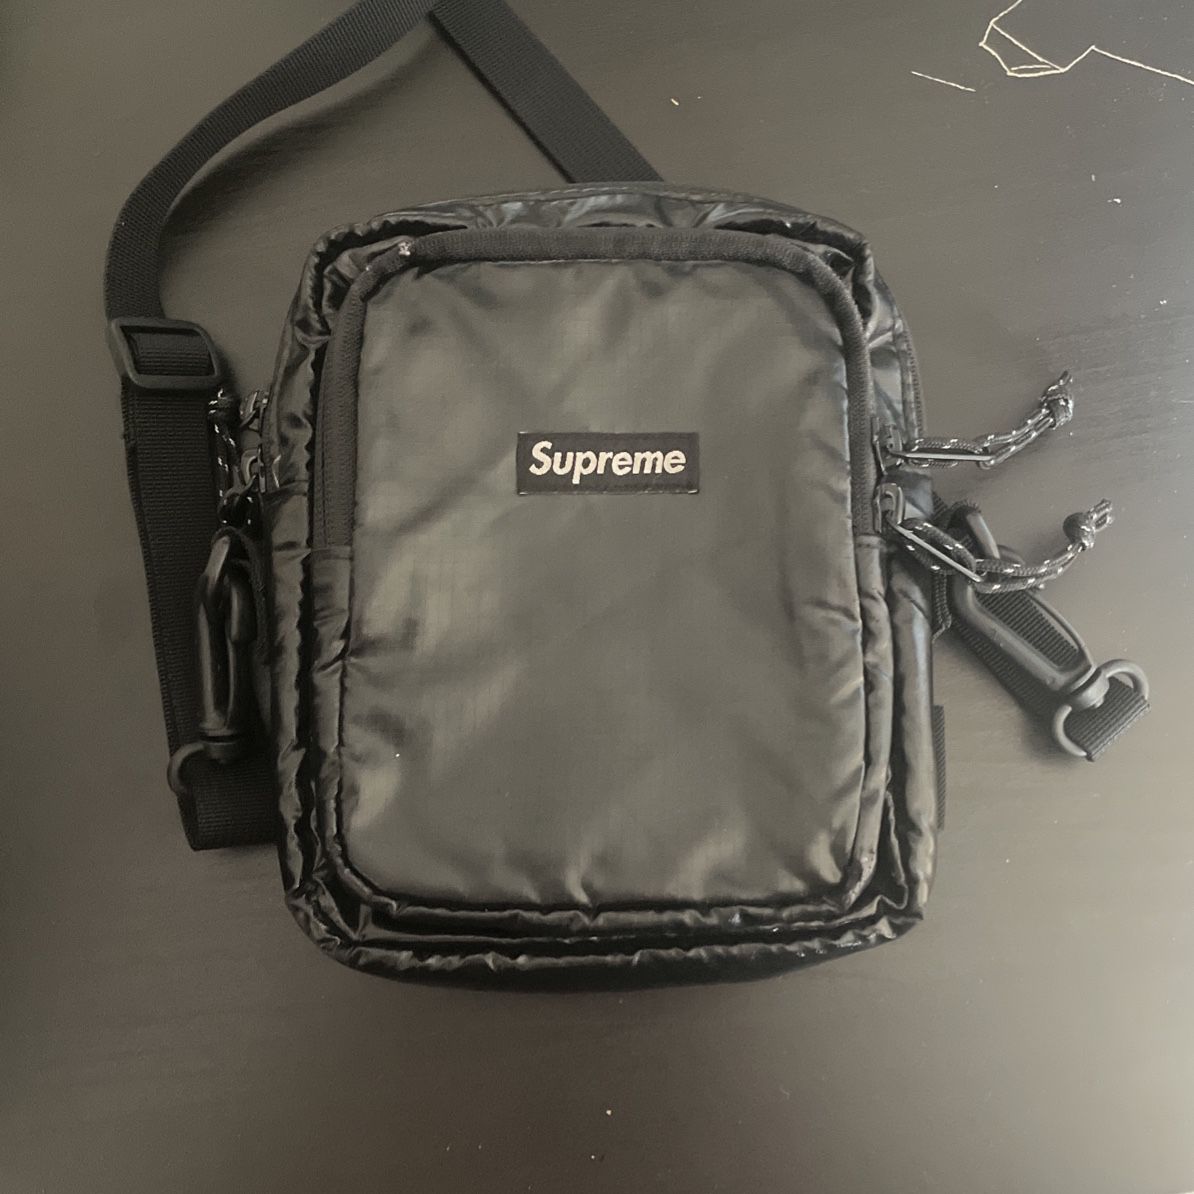 Limited Edition Supreme Bag for Sale in Bellflower, CA - OfferUp